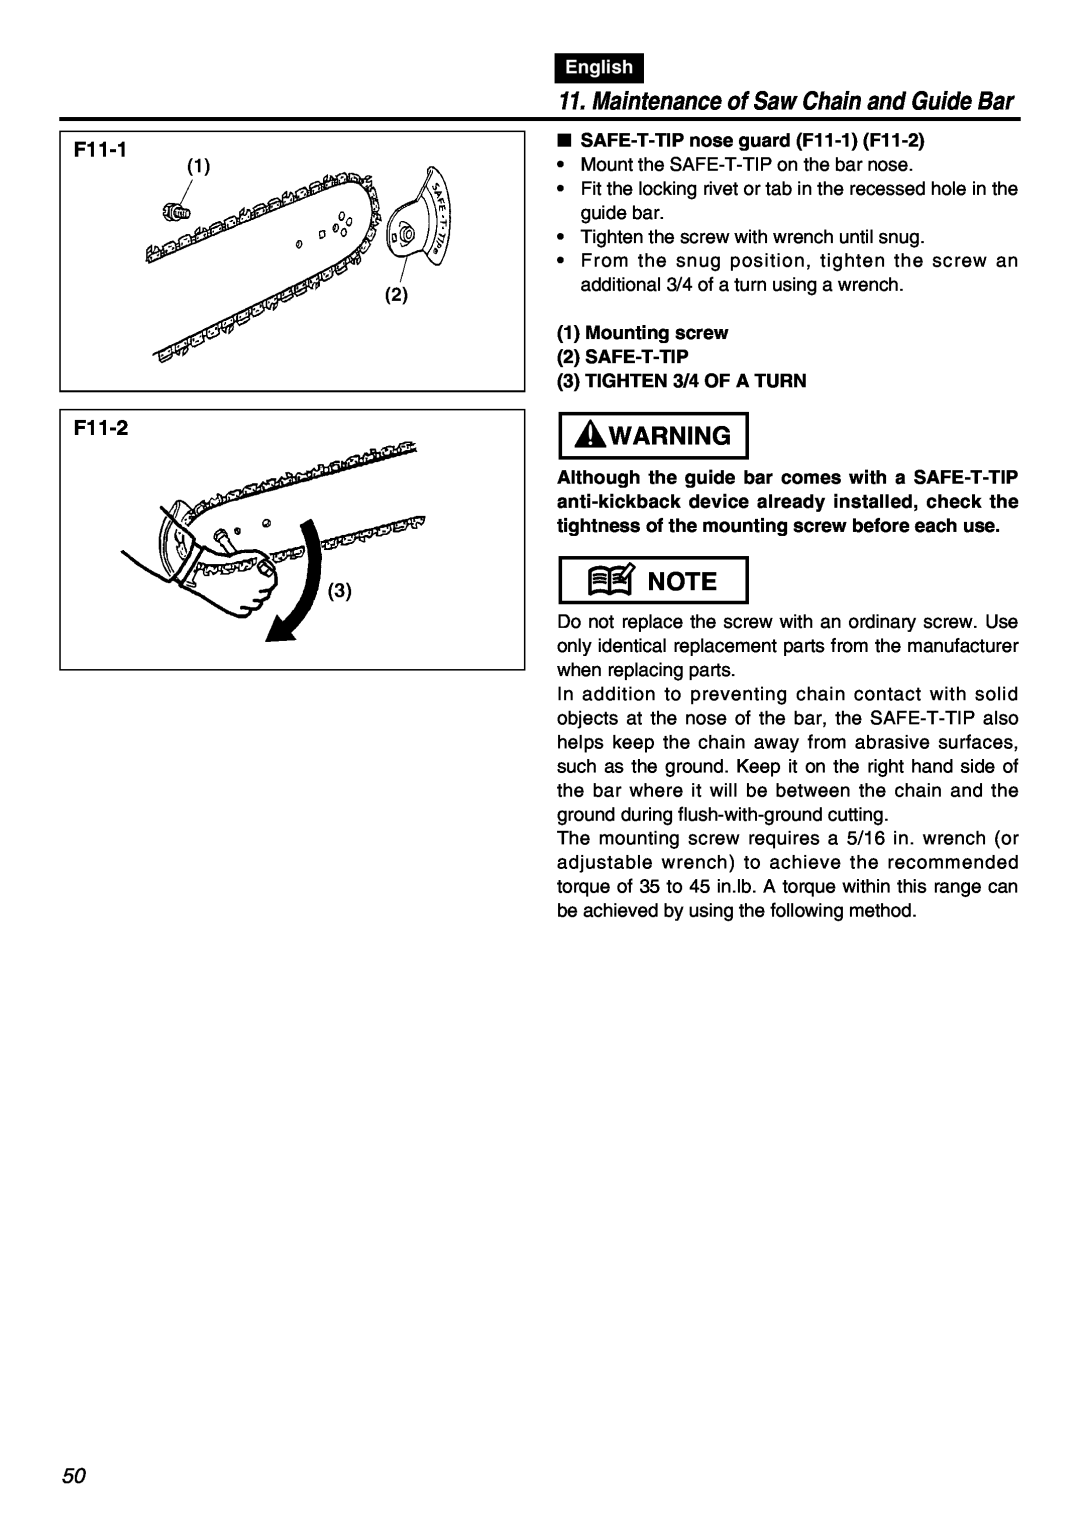 RedMax GZ400 manual Maintenance of Saw Chain and Guide Bar, F11-1 F11-2, English 